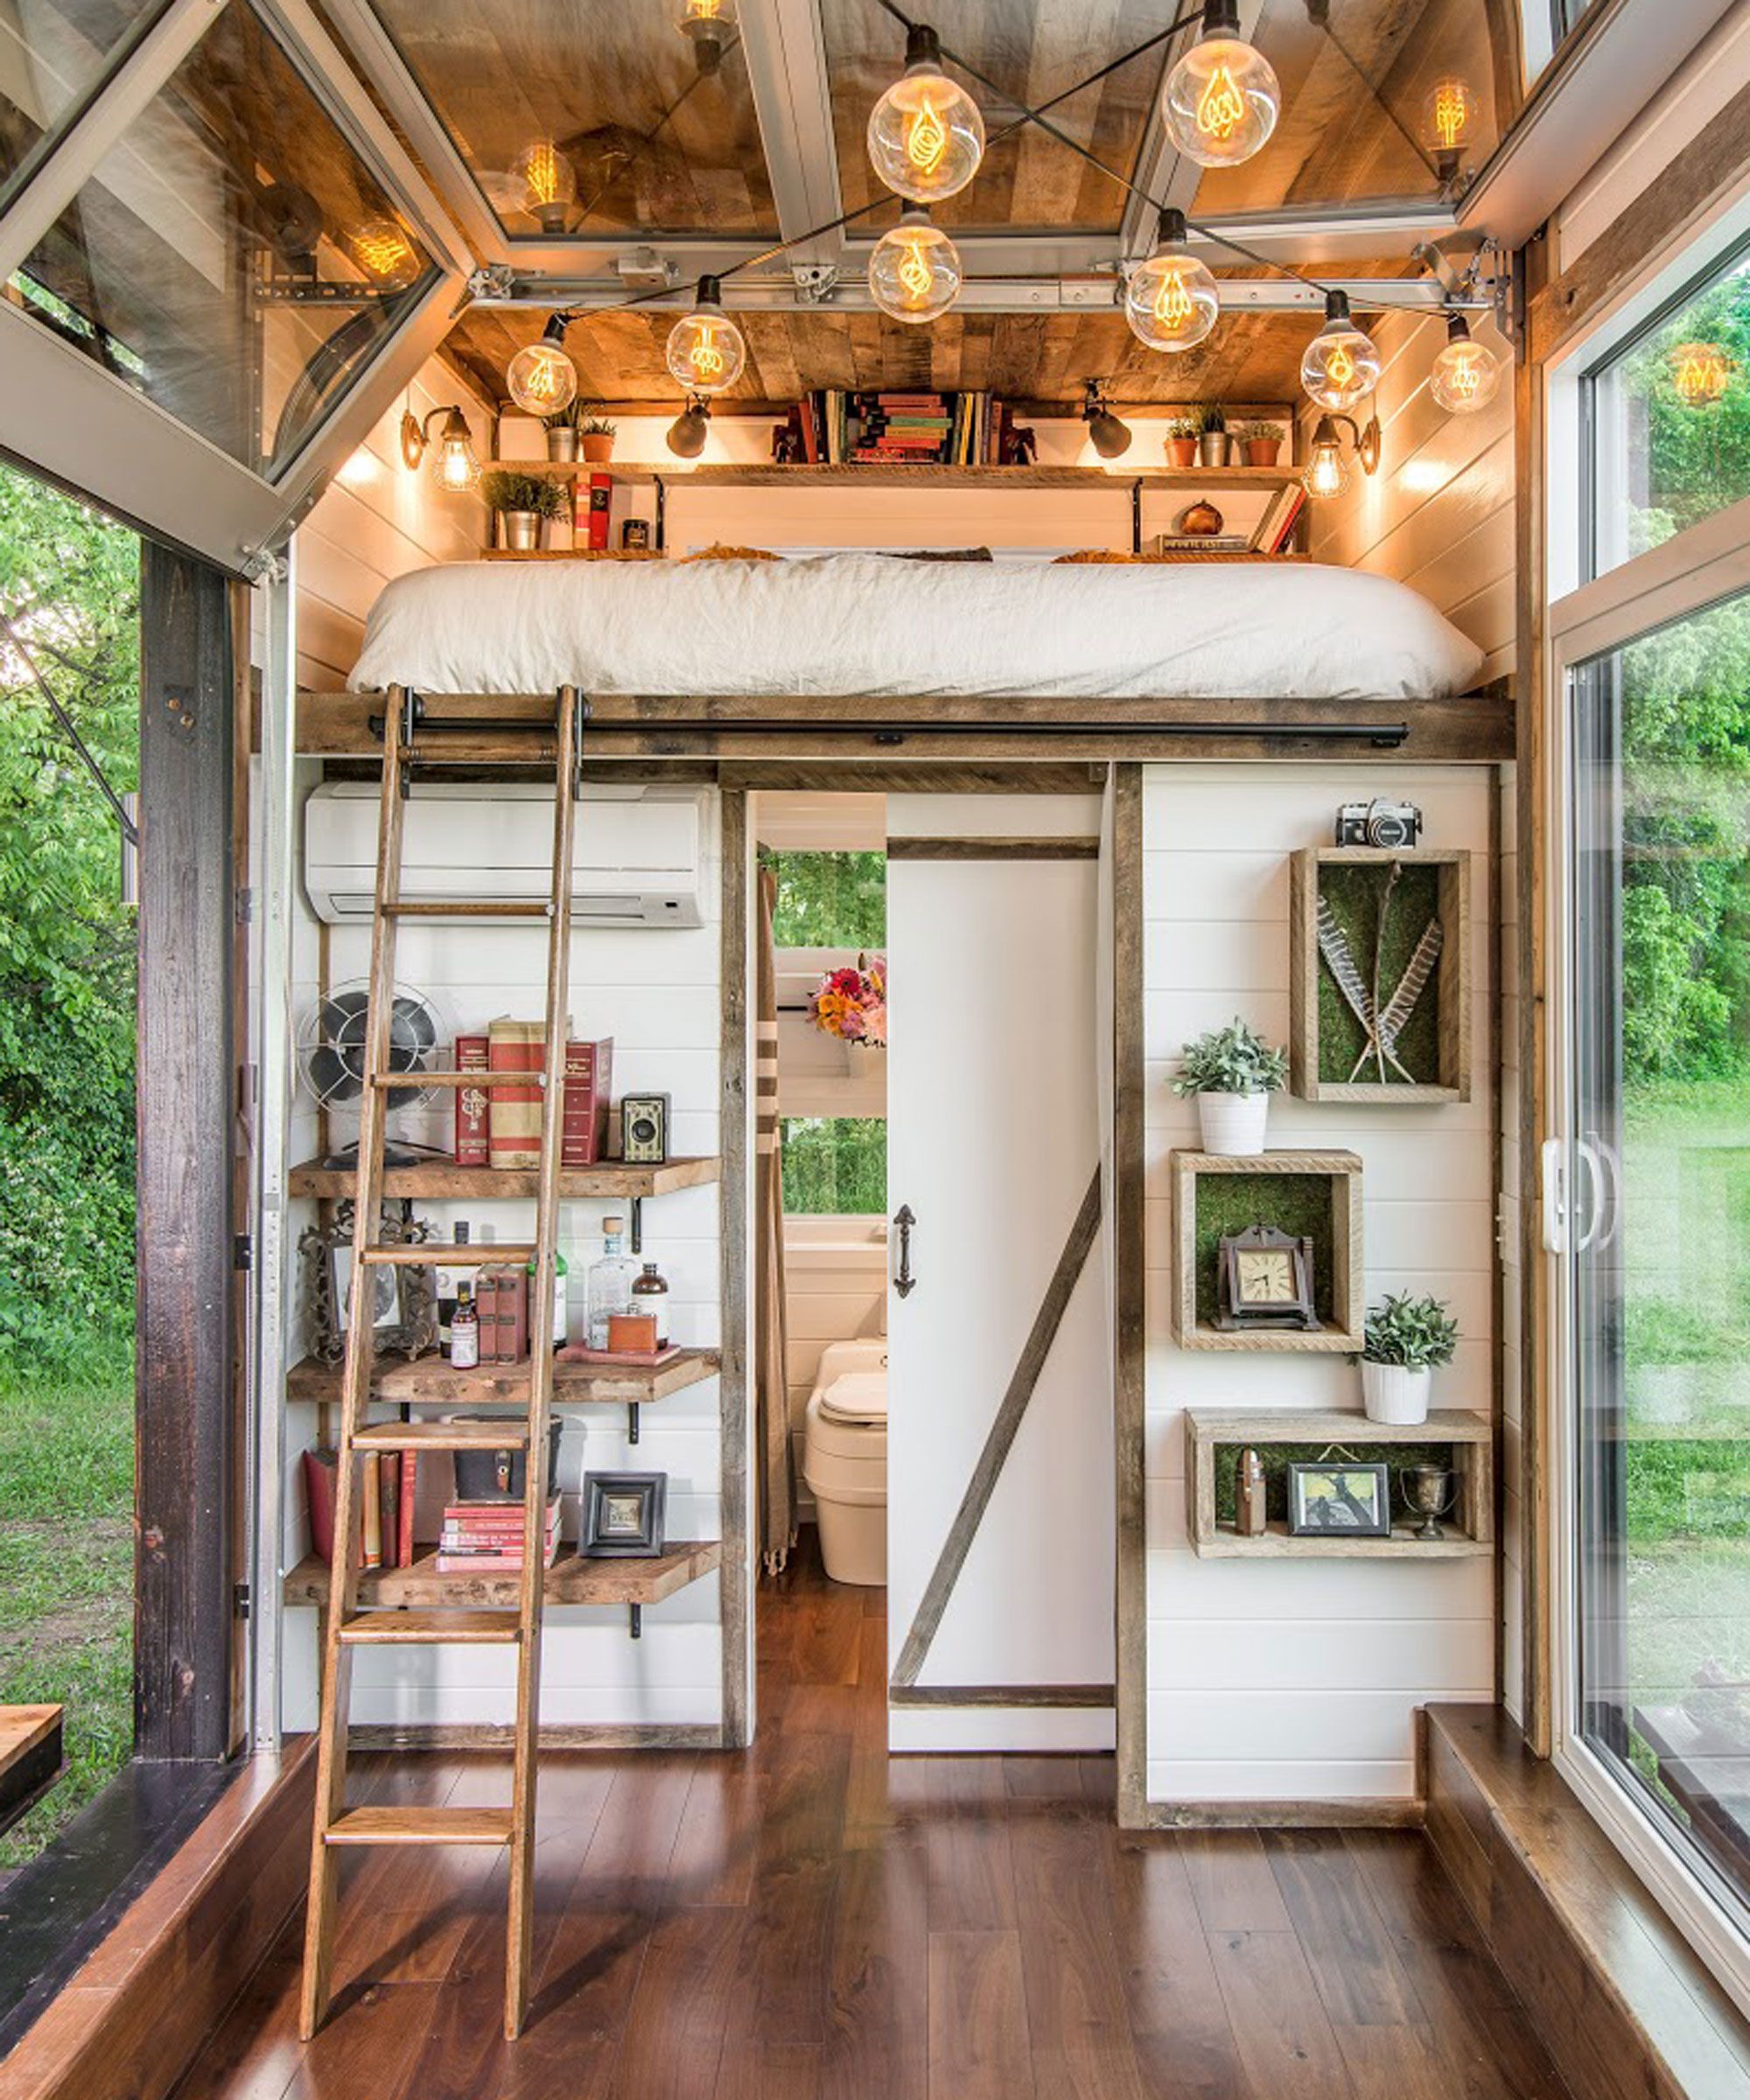 This Gorgeous Tiny House Is Proof That Size Doesn't Matter | HuffPost